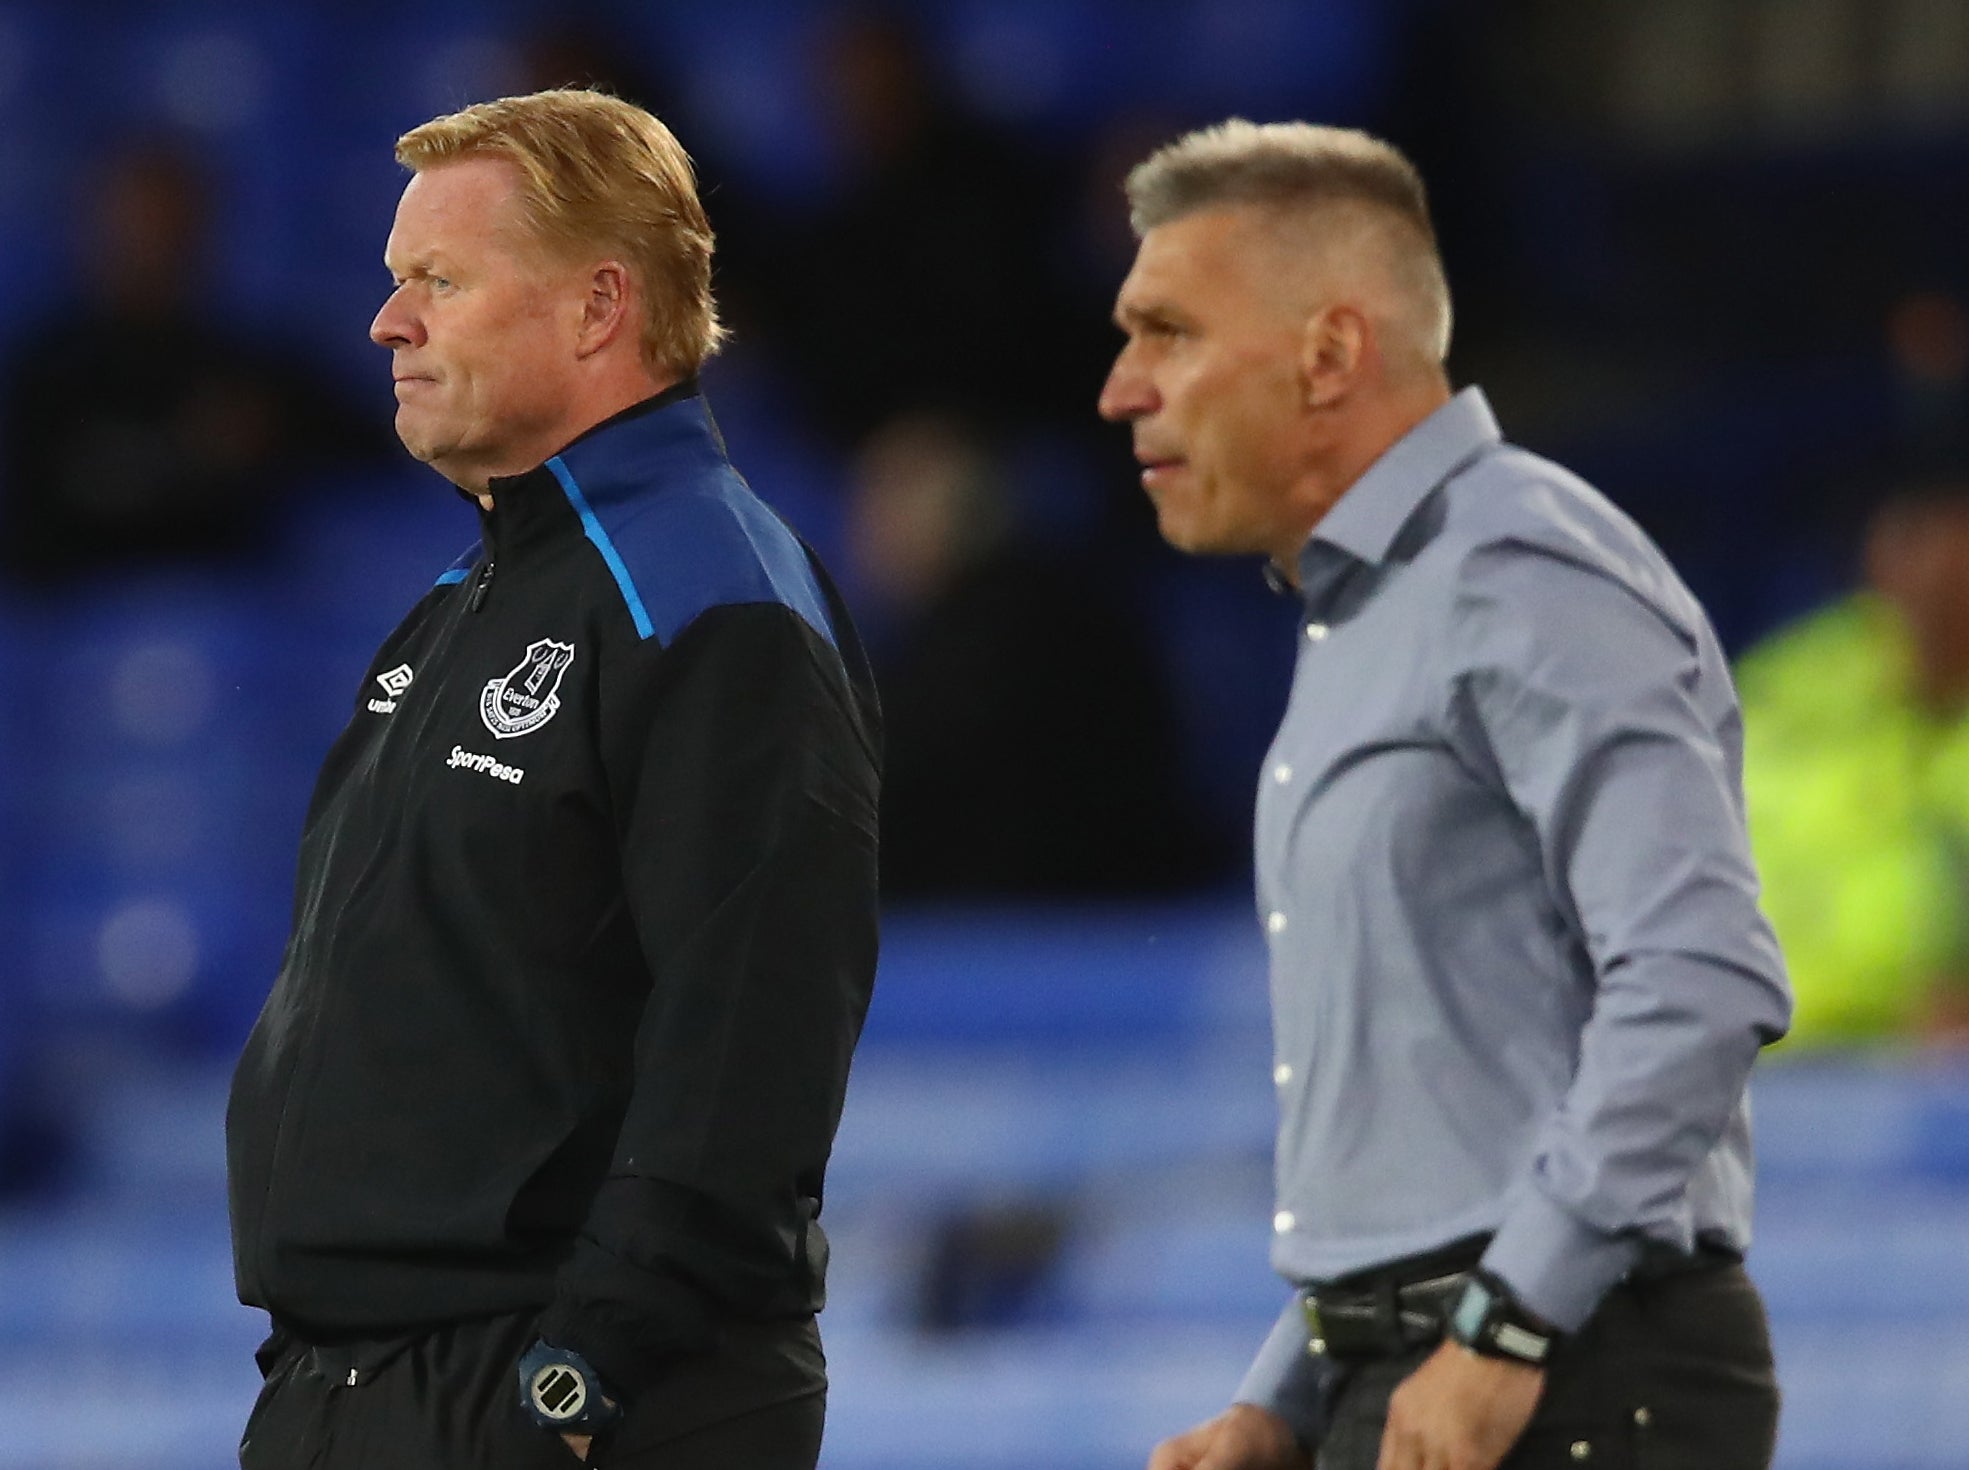 Koeman was not overly impressed with his side's performance